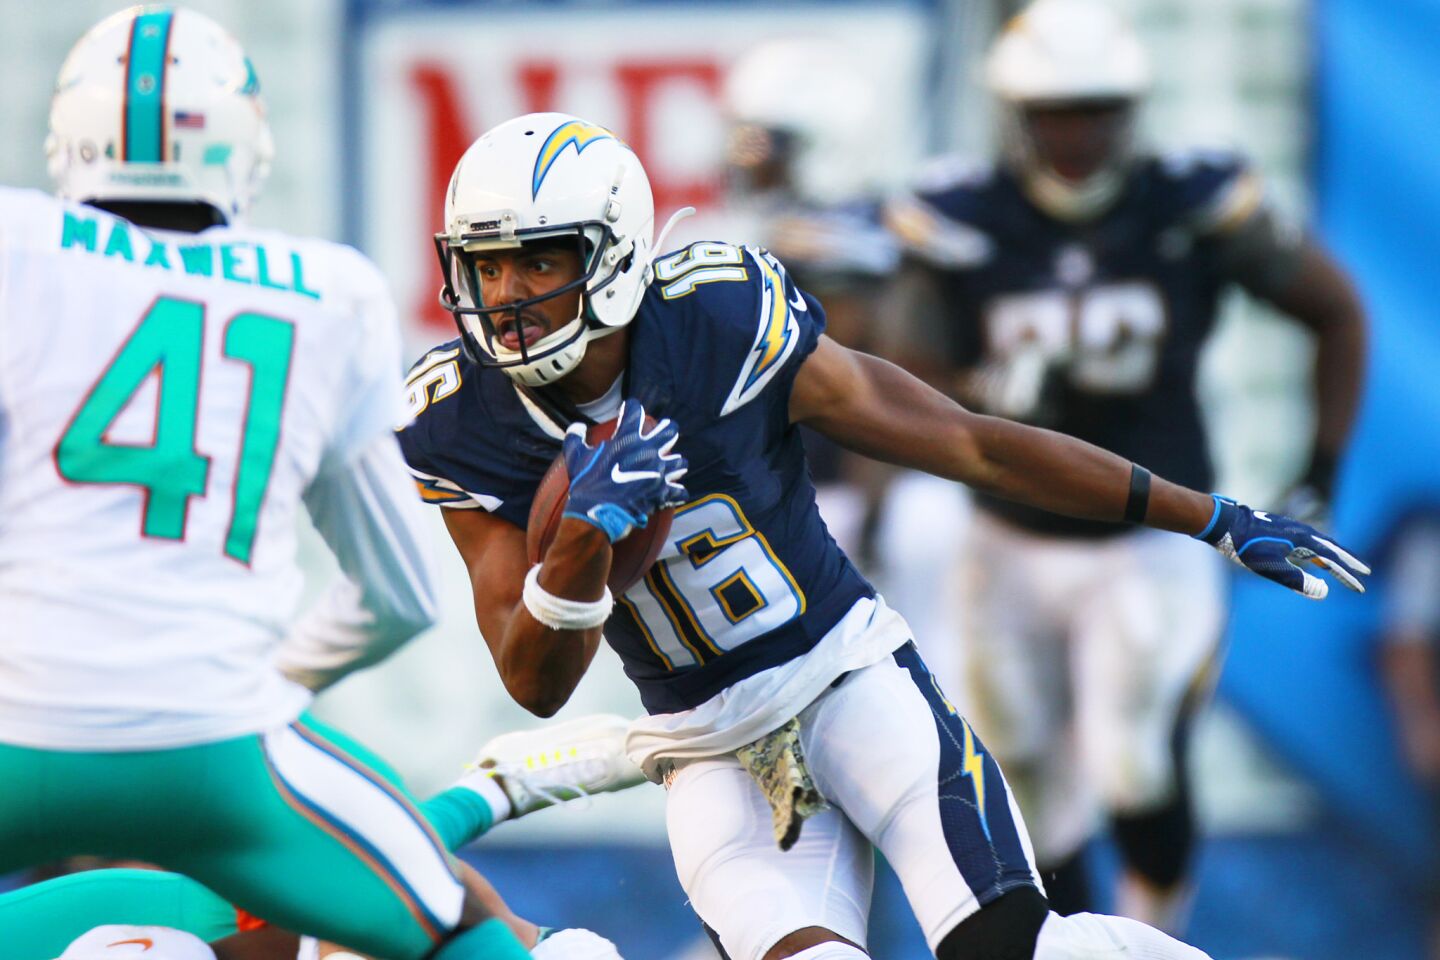 Chargers vs. Dolphins 11/13/16